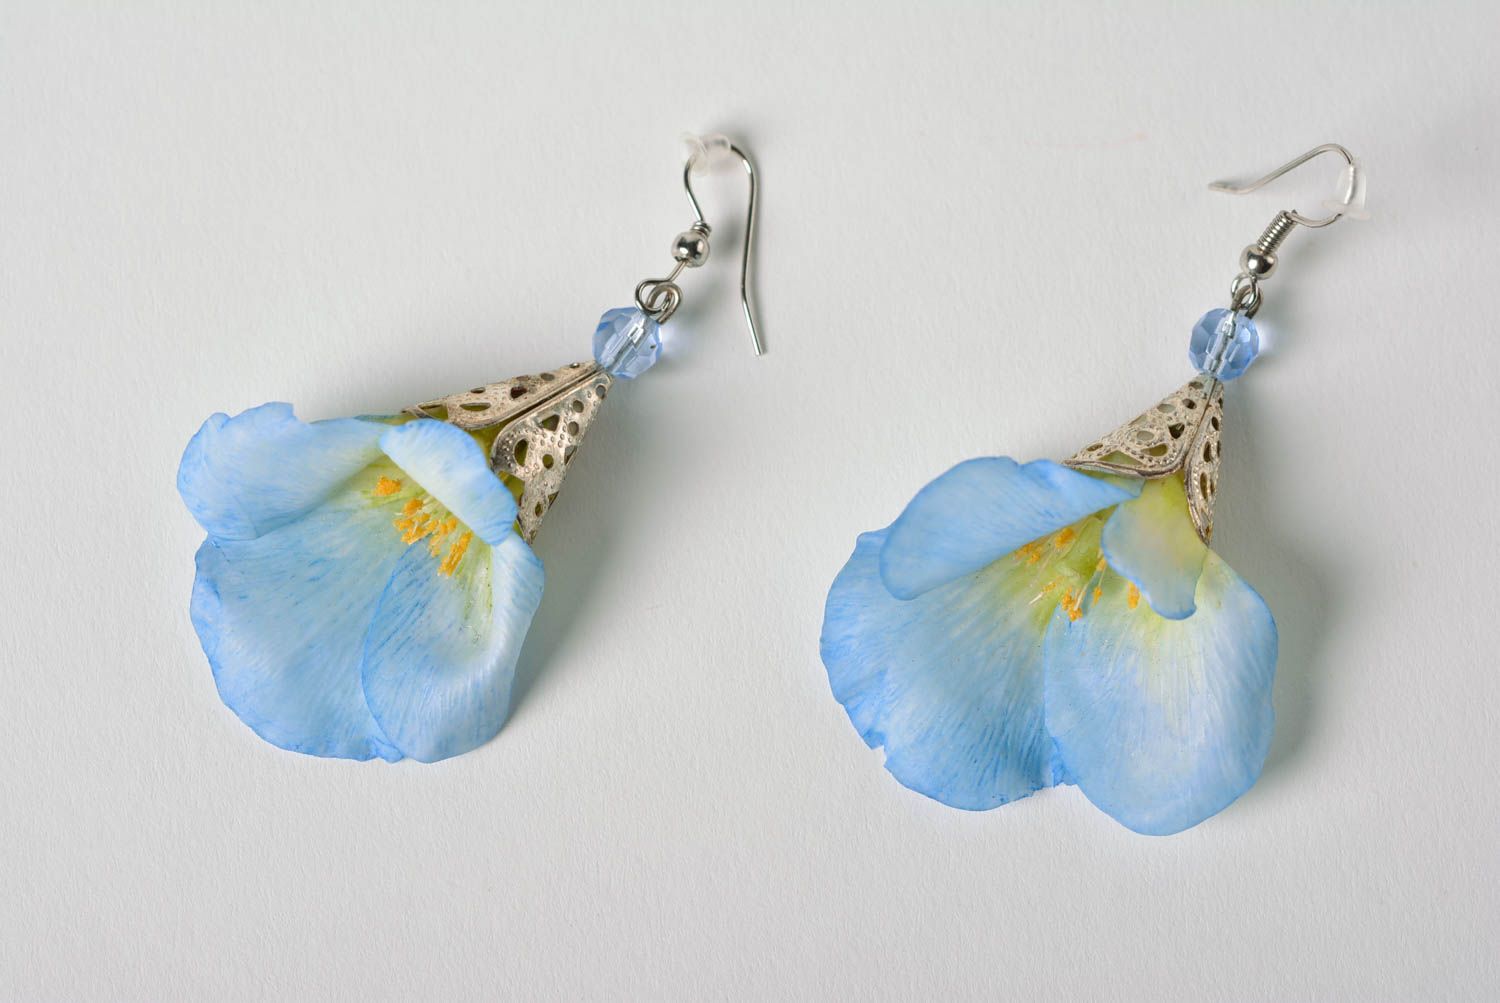 Homemade designer dangling earrings with blue flowers molded of polymer clay photo 2